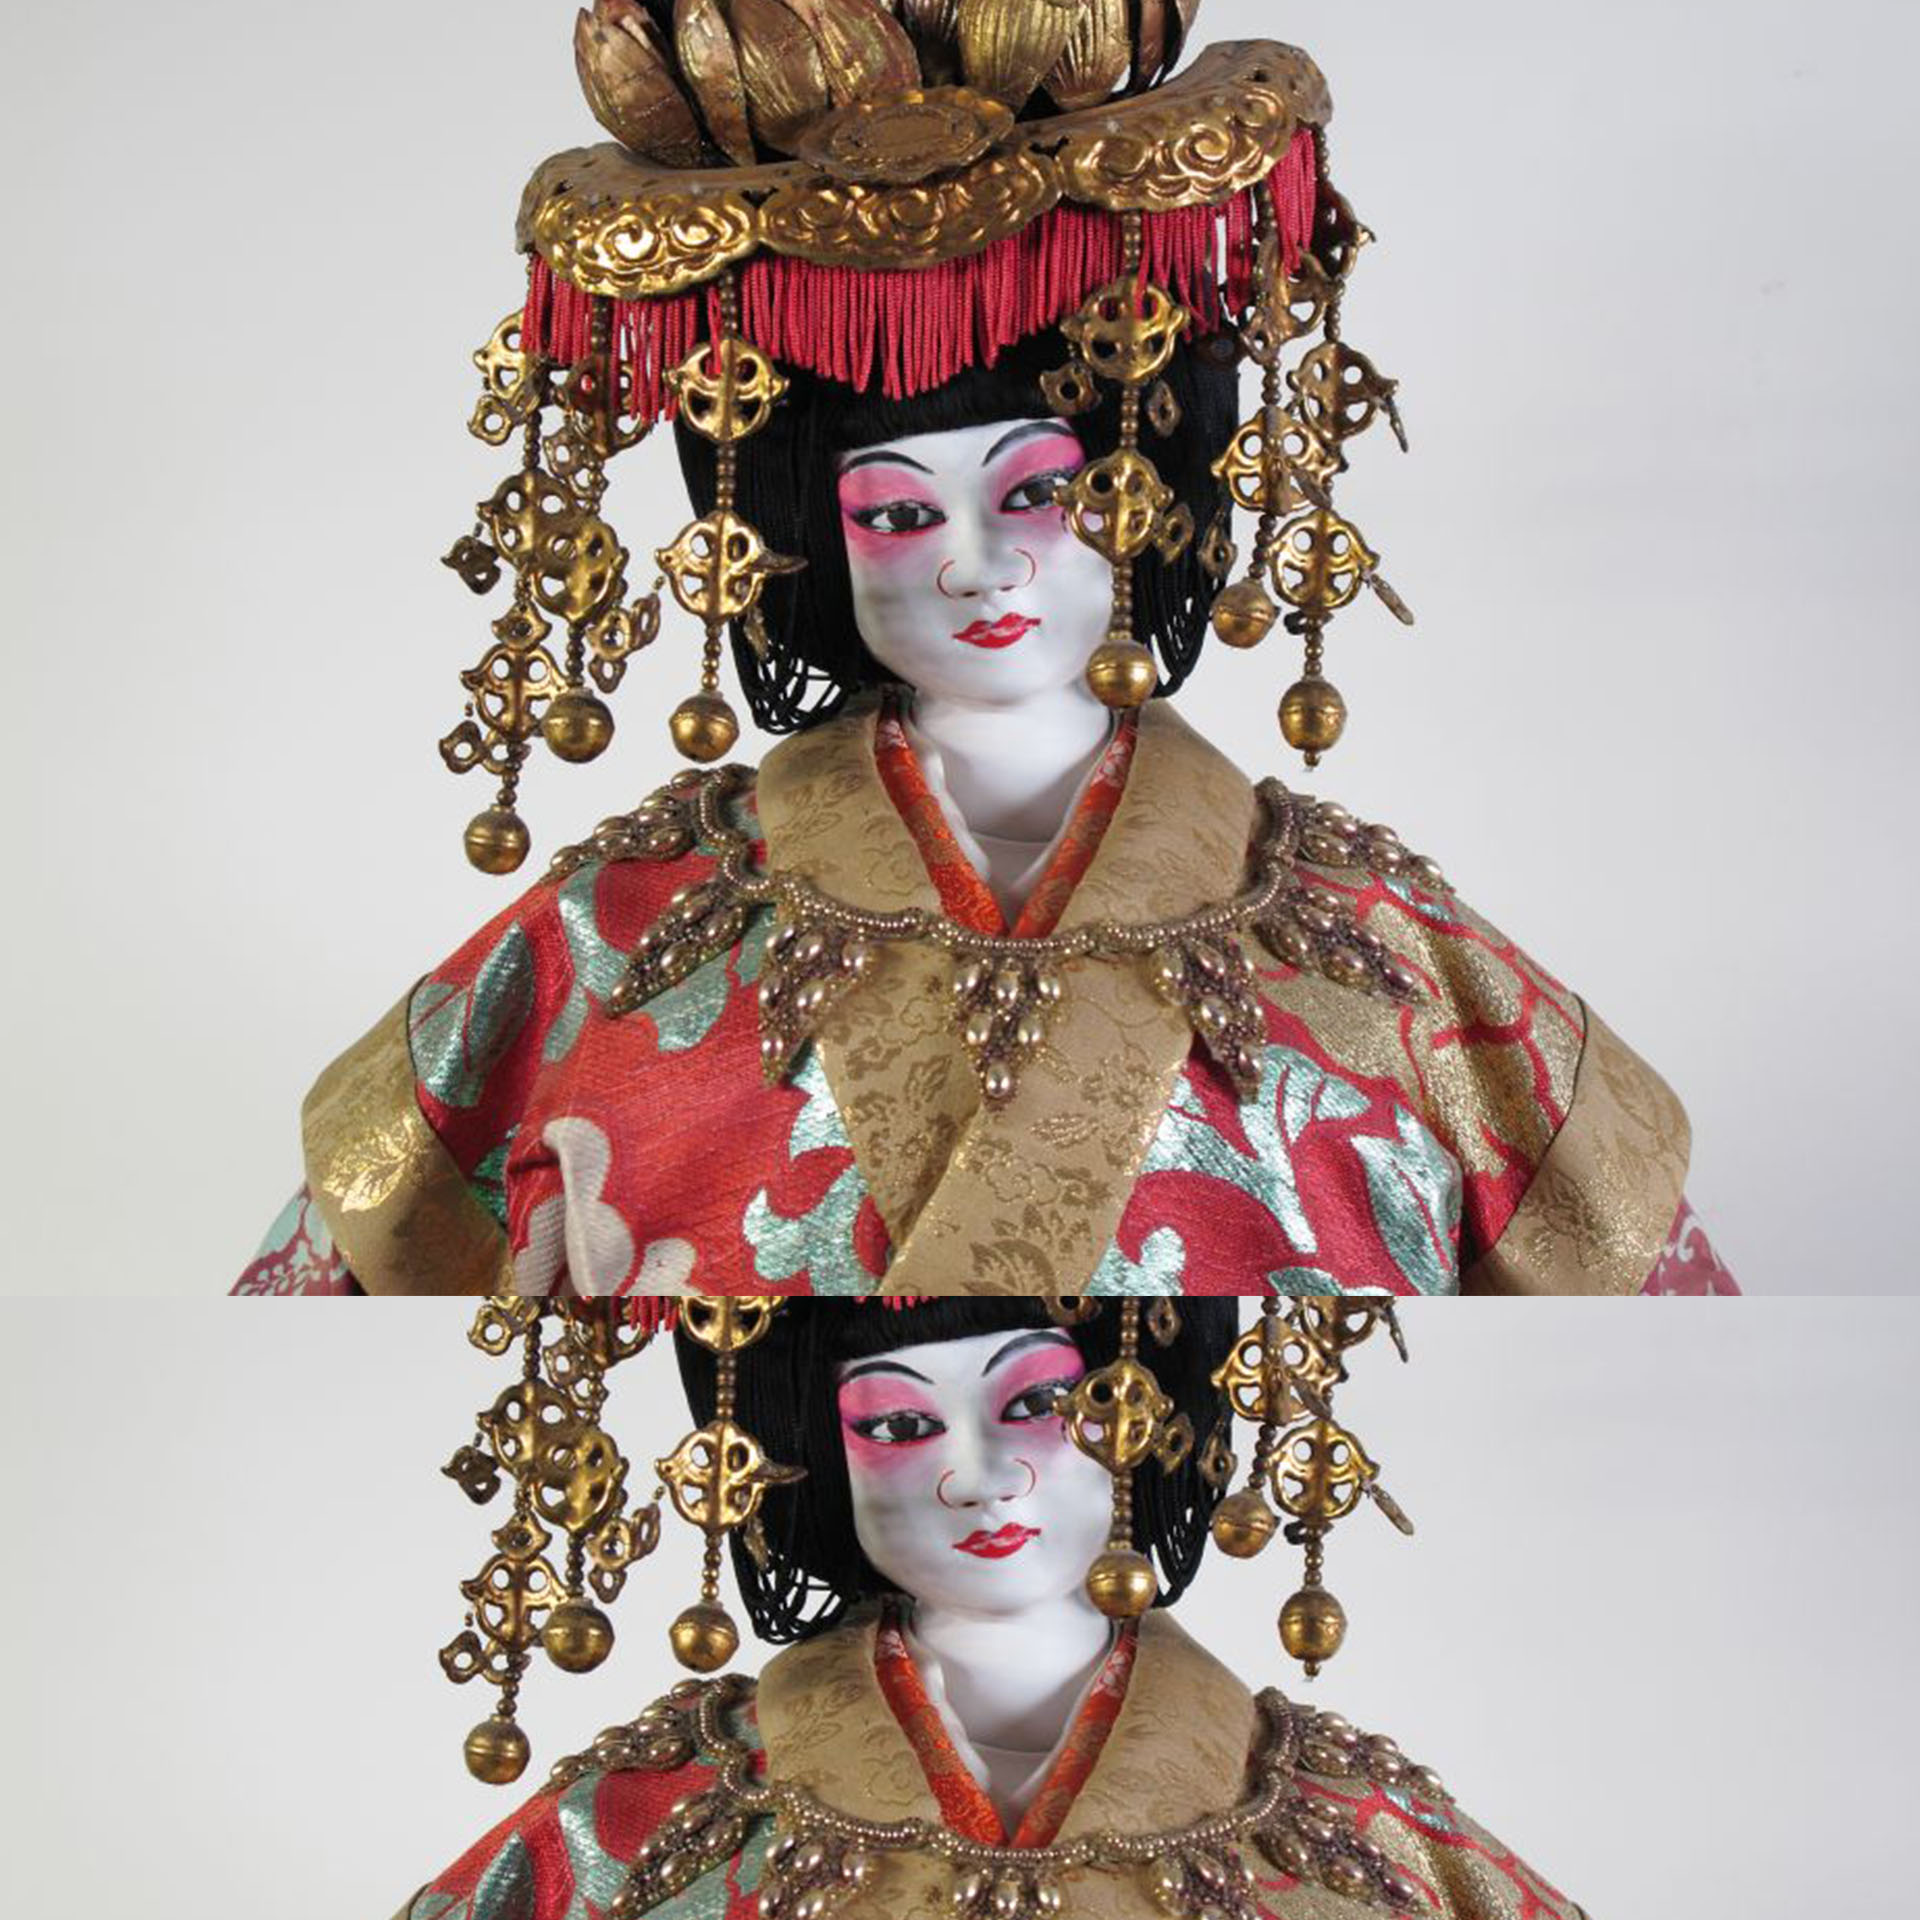 A puppet by Kihachirō Kawamoto acquired from Atelier Frédéric Back